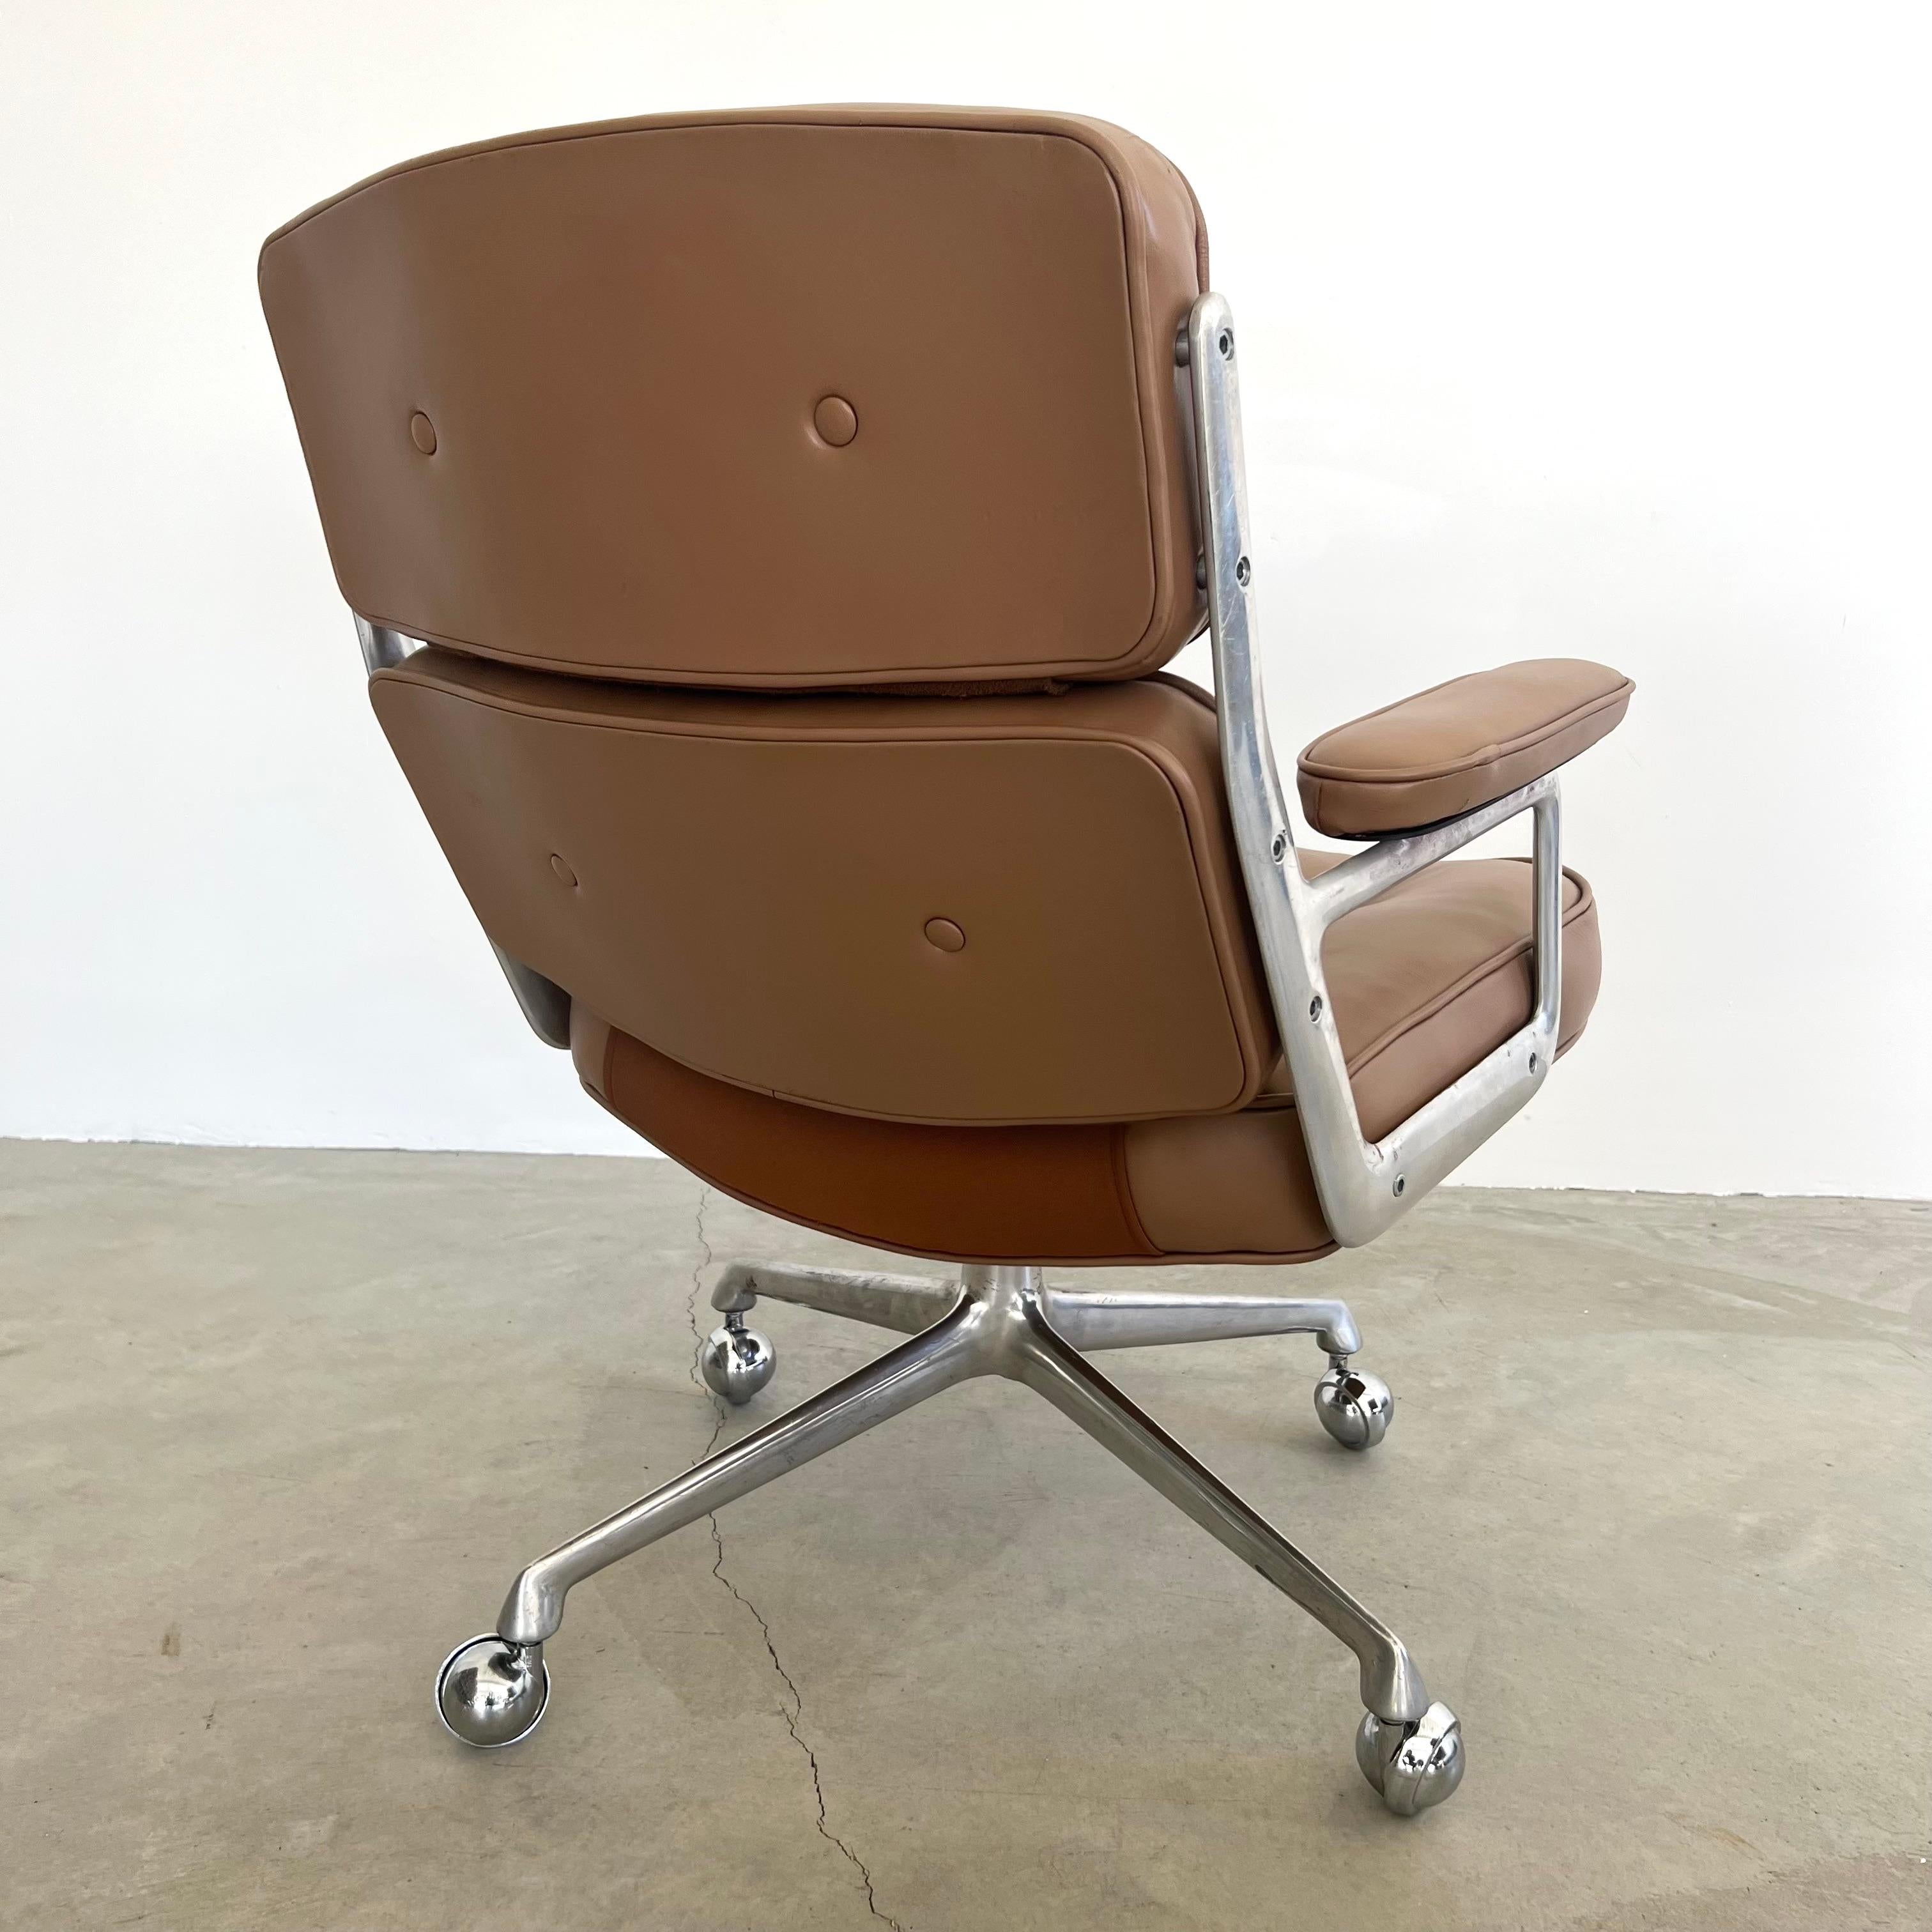 American Eames Time Life Chair in Tan Leather for Herman Miller, 1980s USA For Sale